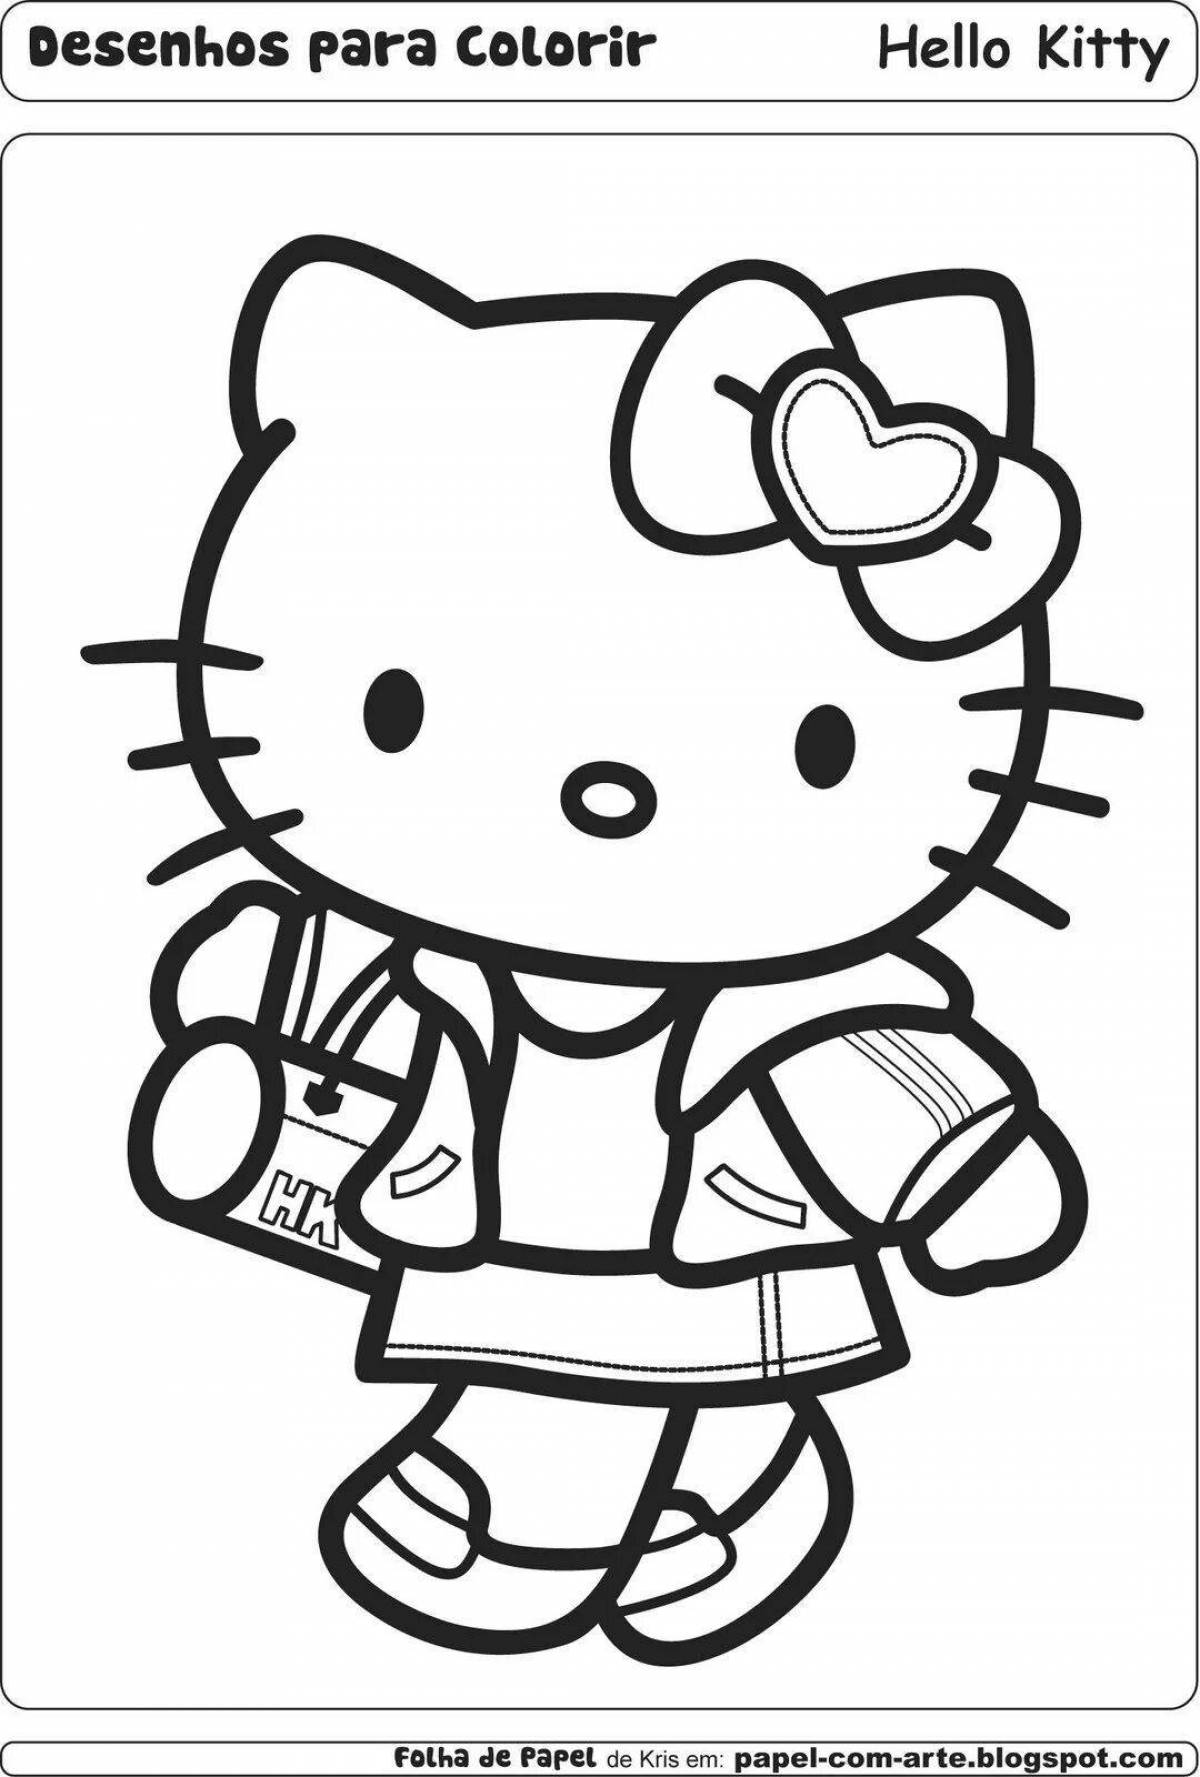 Cute kitty chicken coloring book